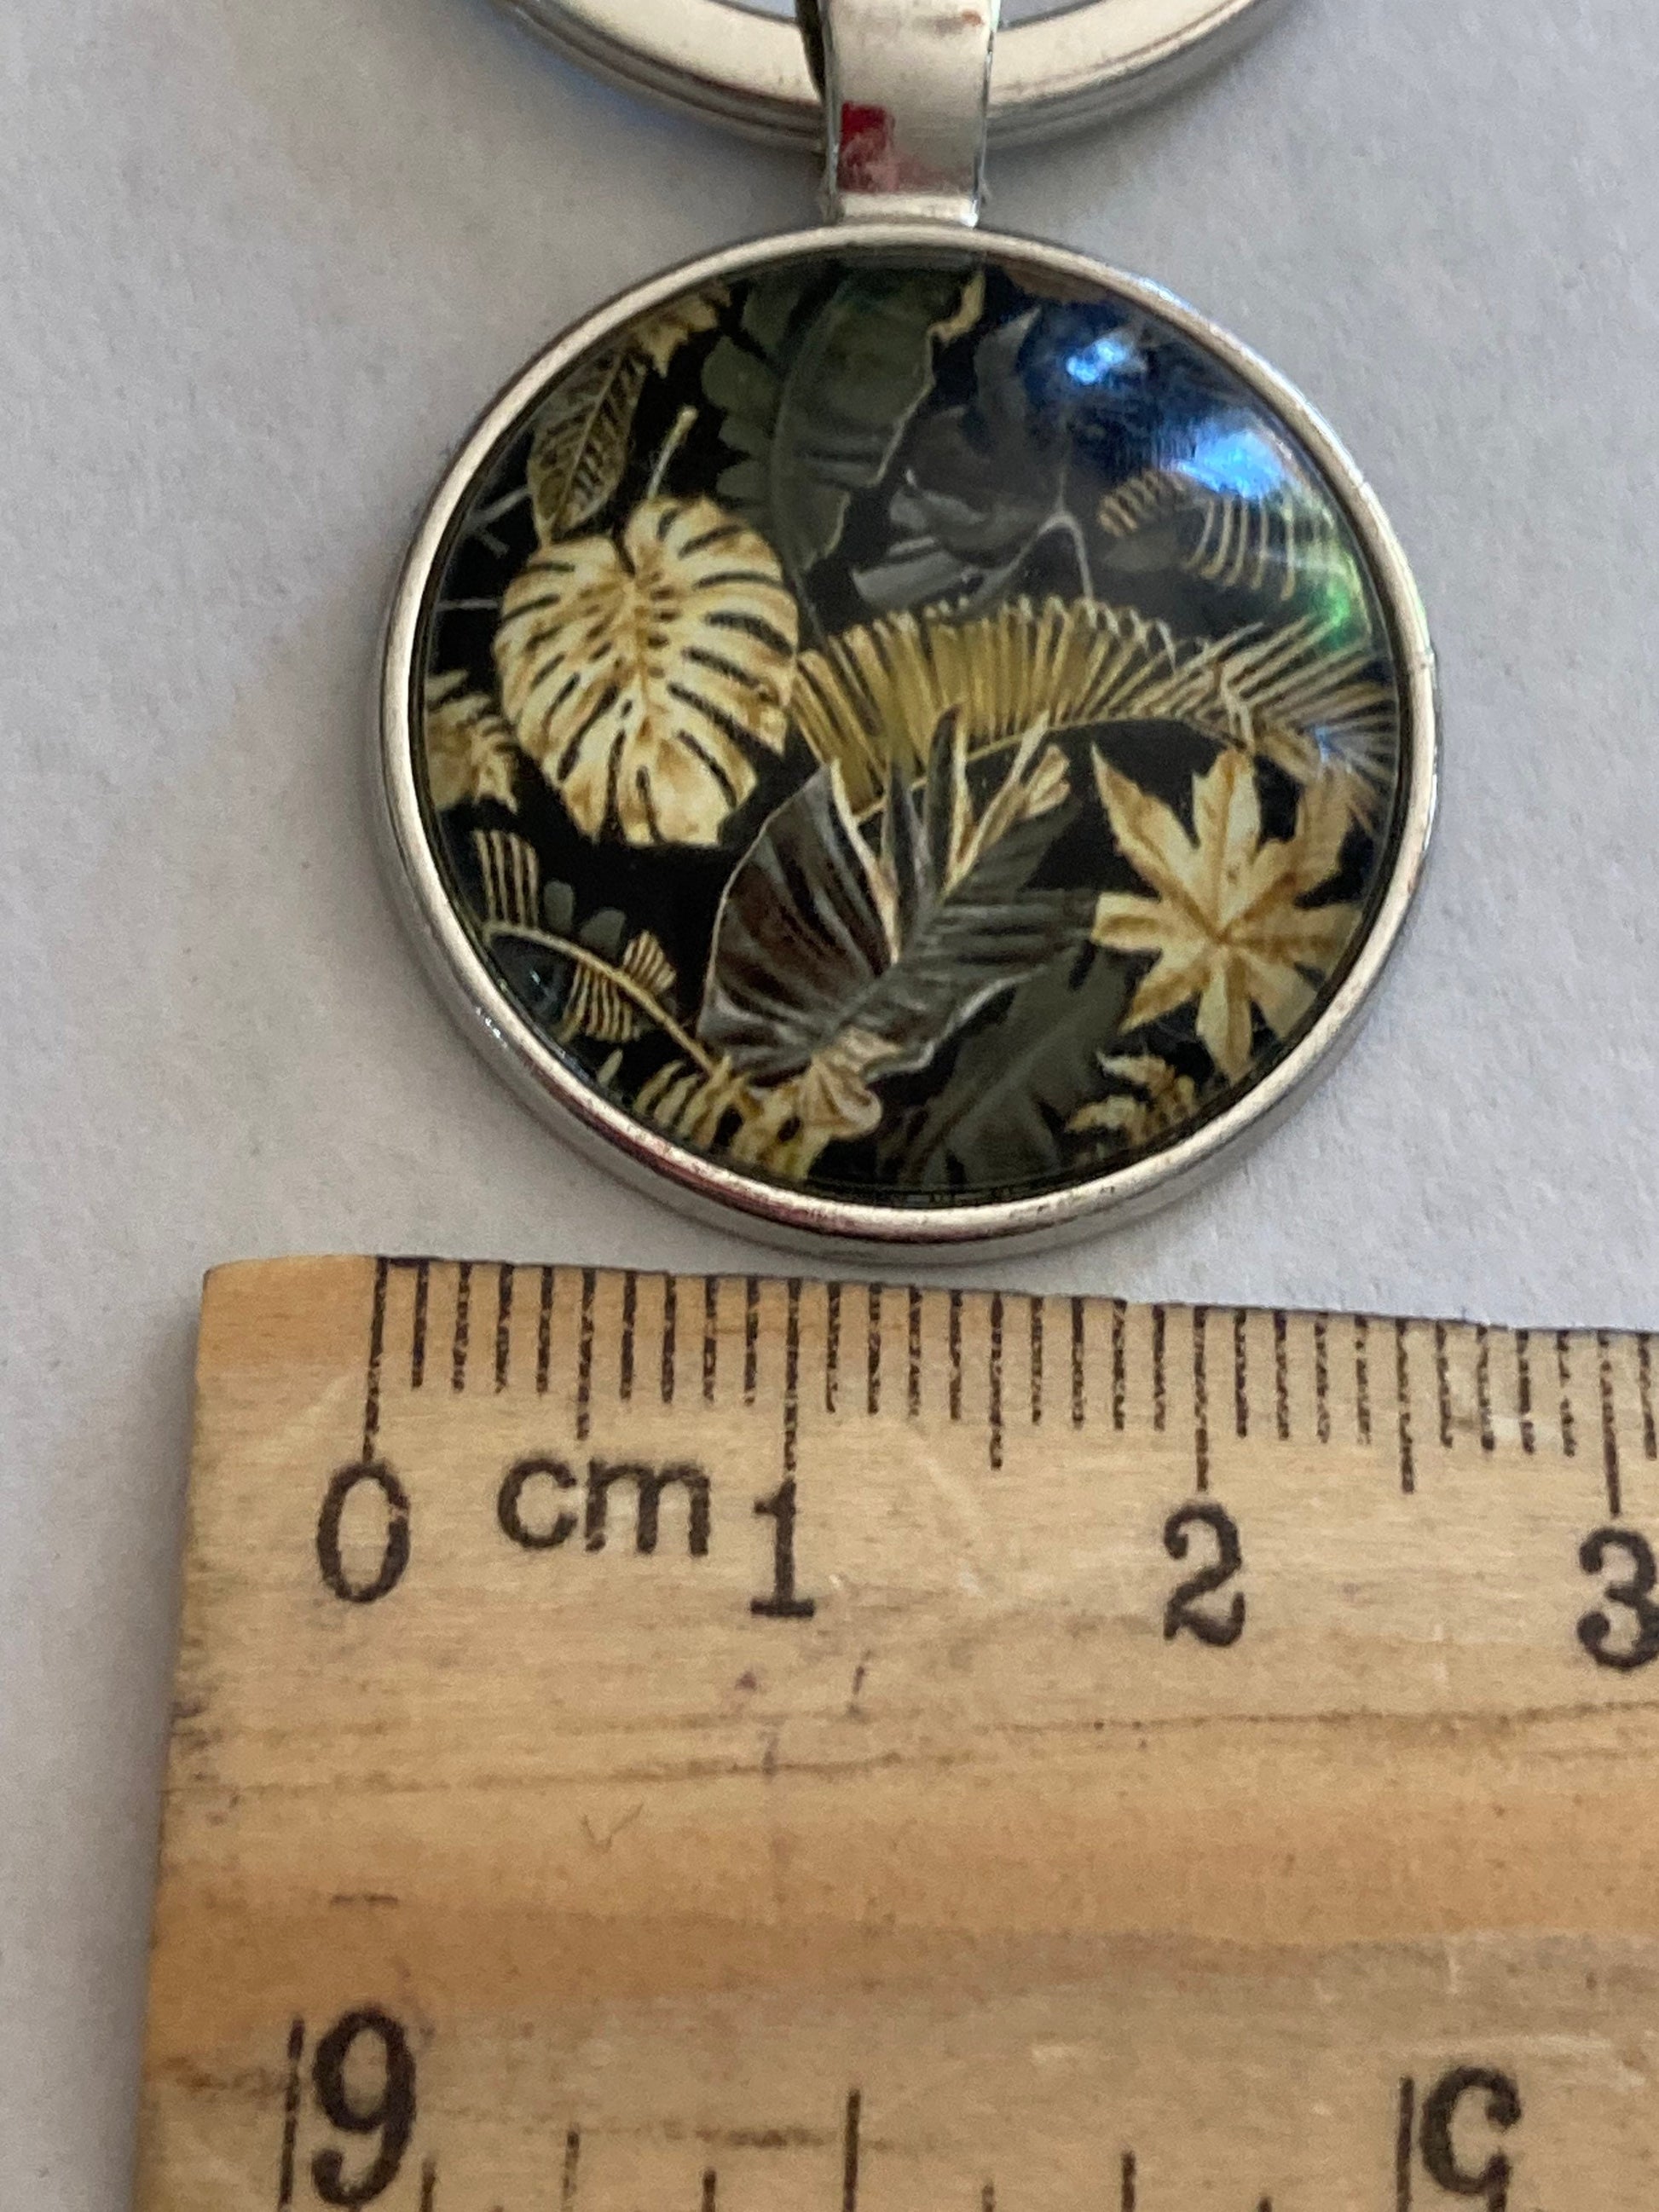 Designer style black and gold palm tree print silver tone keyring with 25mm glass cabochon